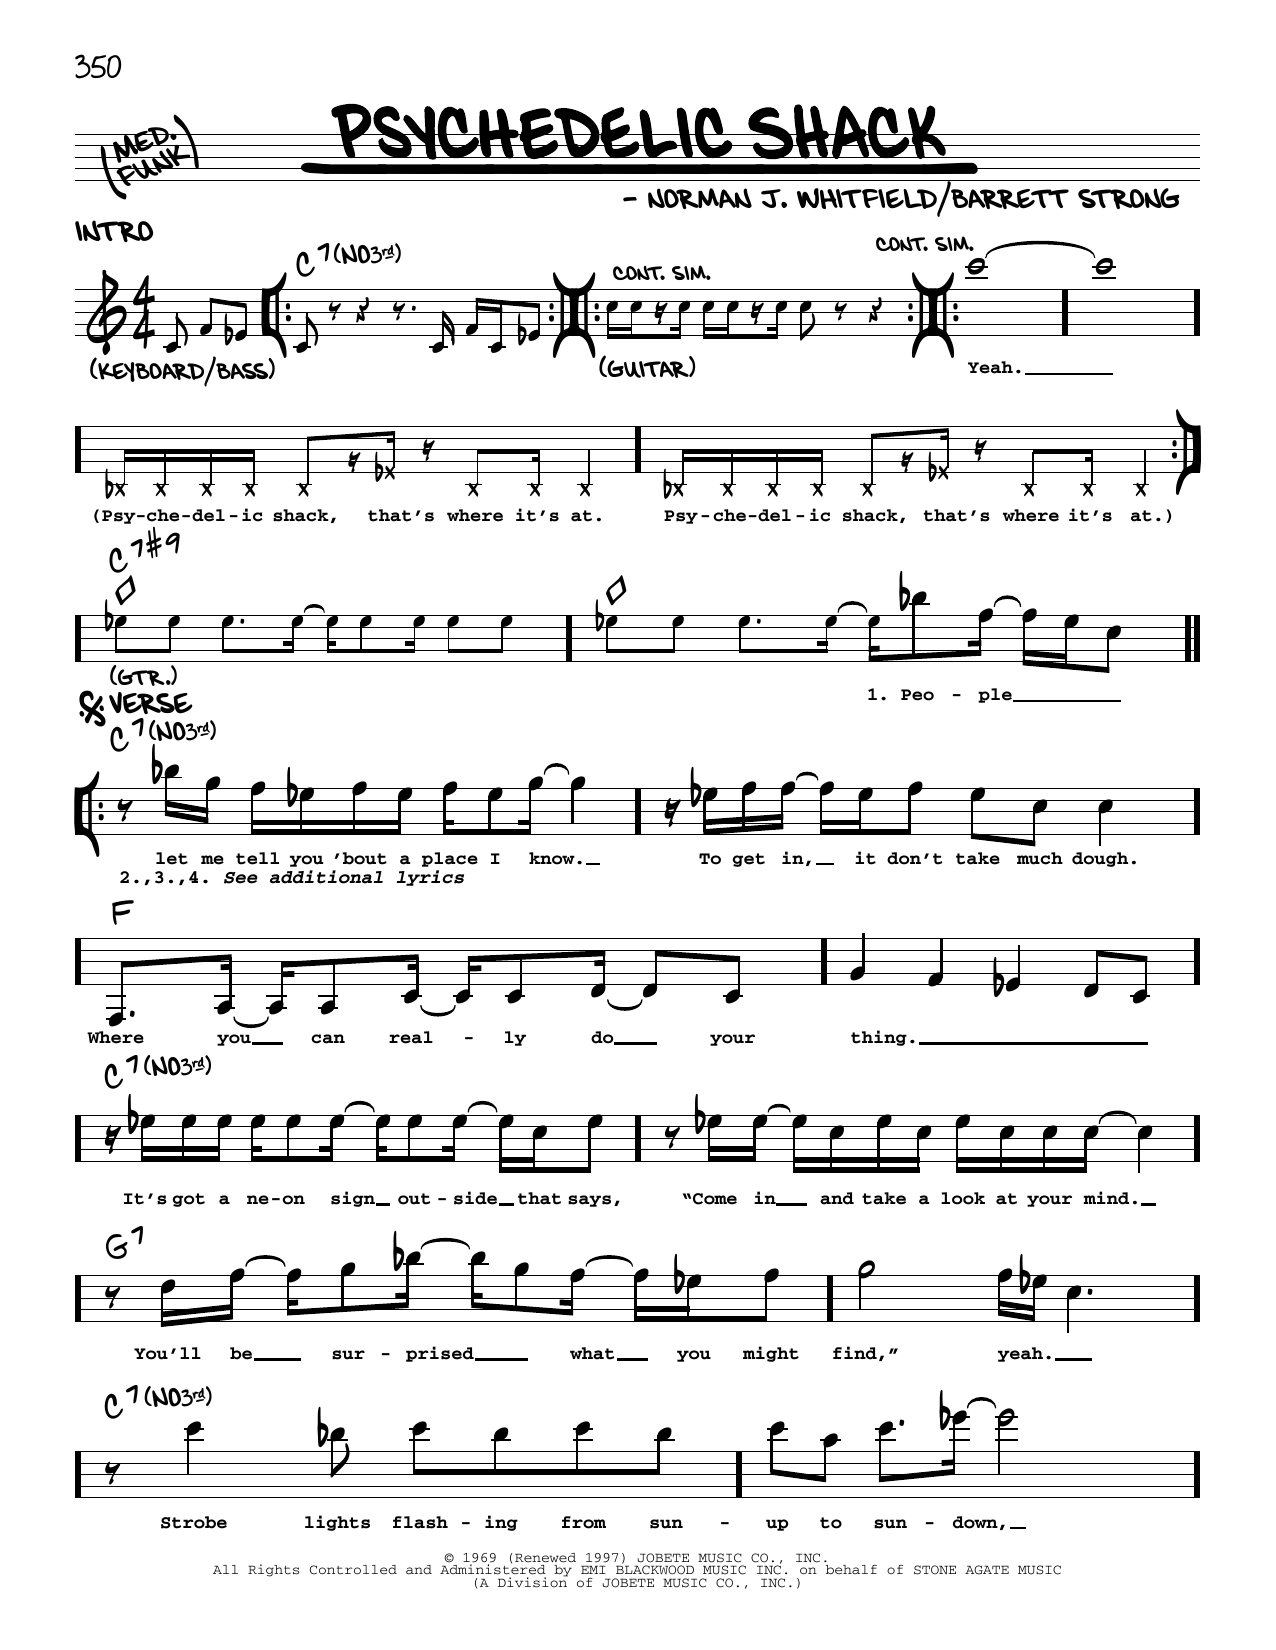 Download The Temptations Psychedelic Shack Sheet Music